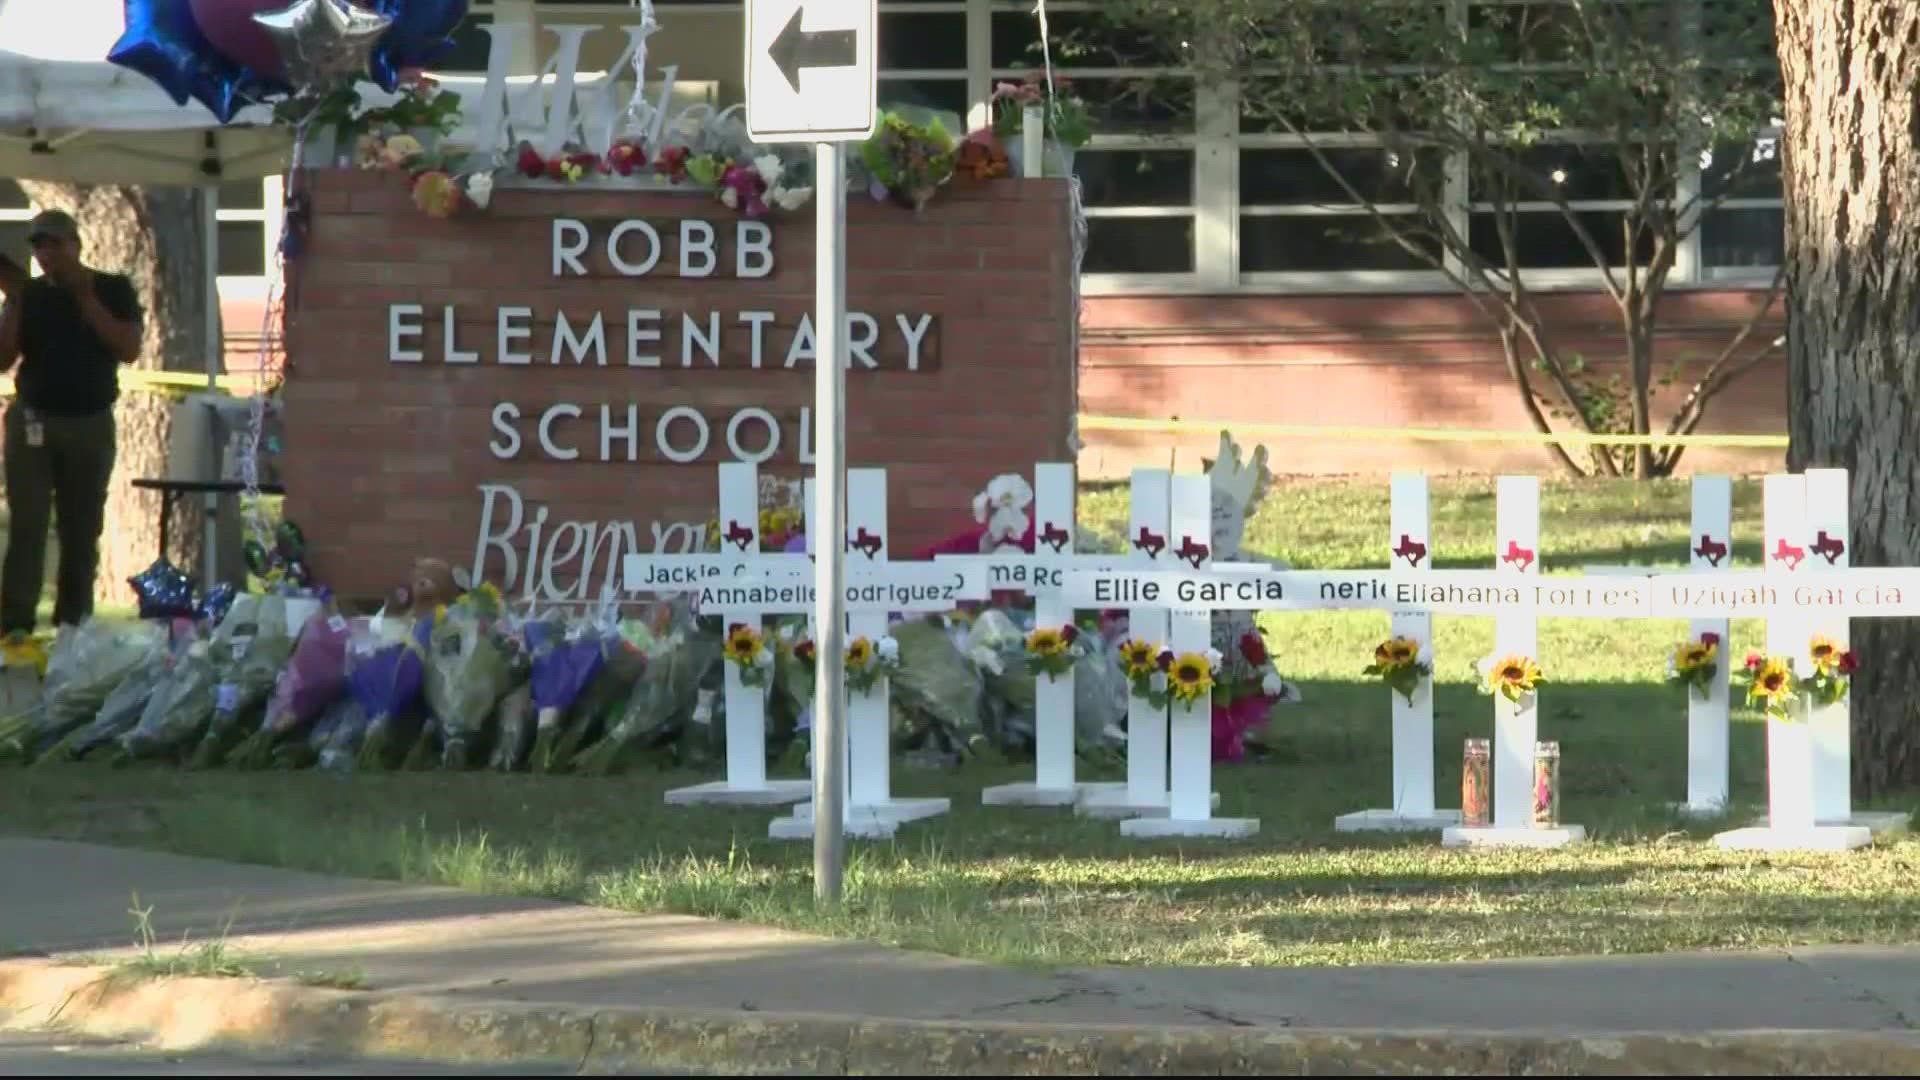 Two teachers and 19 children were killed in the shooting.